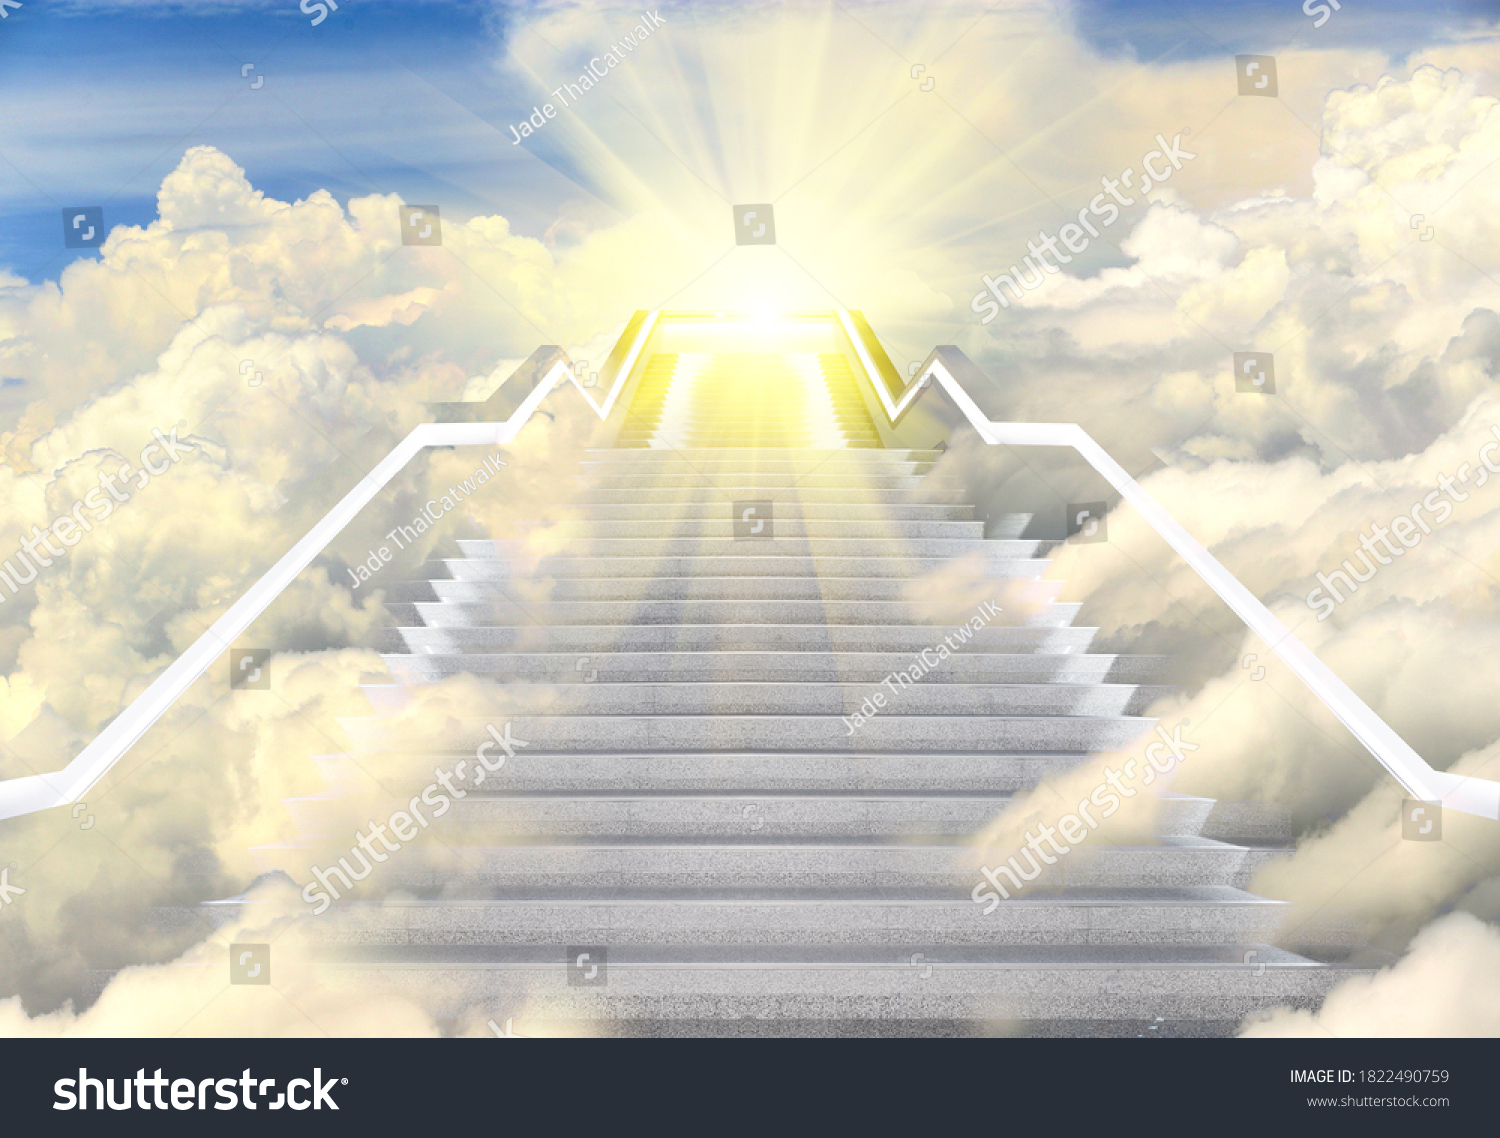 Long Staircase high way to heaven, Empty Stair steps along Cloud in Sky to Light of Hope or Sun. Concept Bright Future in Life. Stairs way lead up to heaven sky toward light, copy space #1822490759